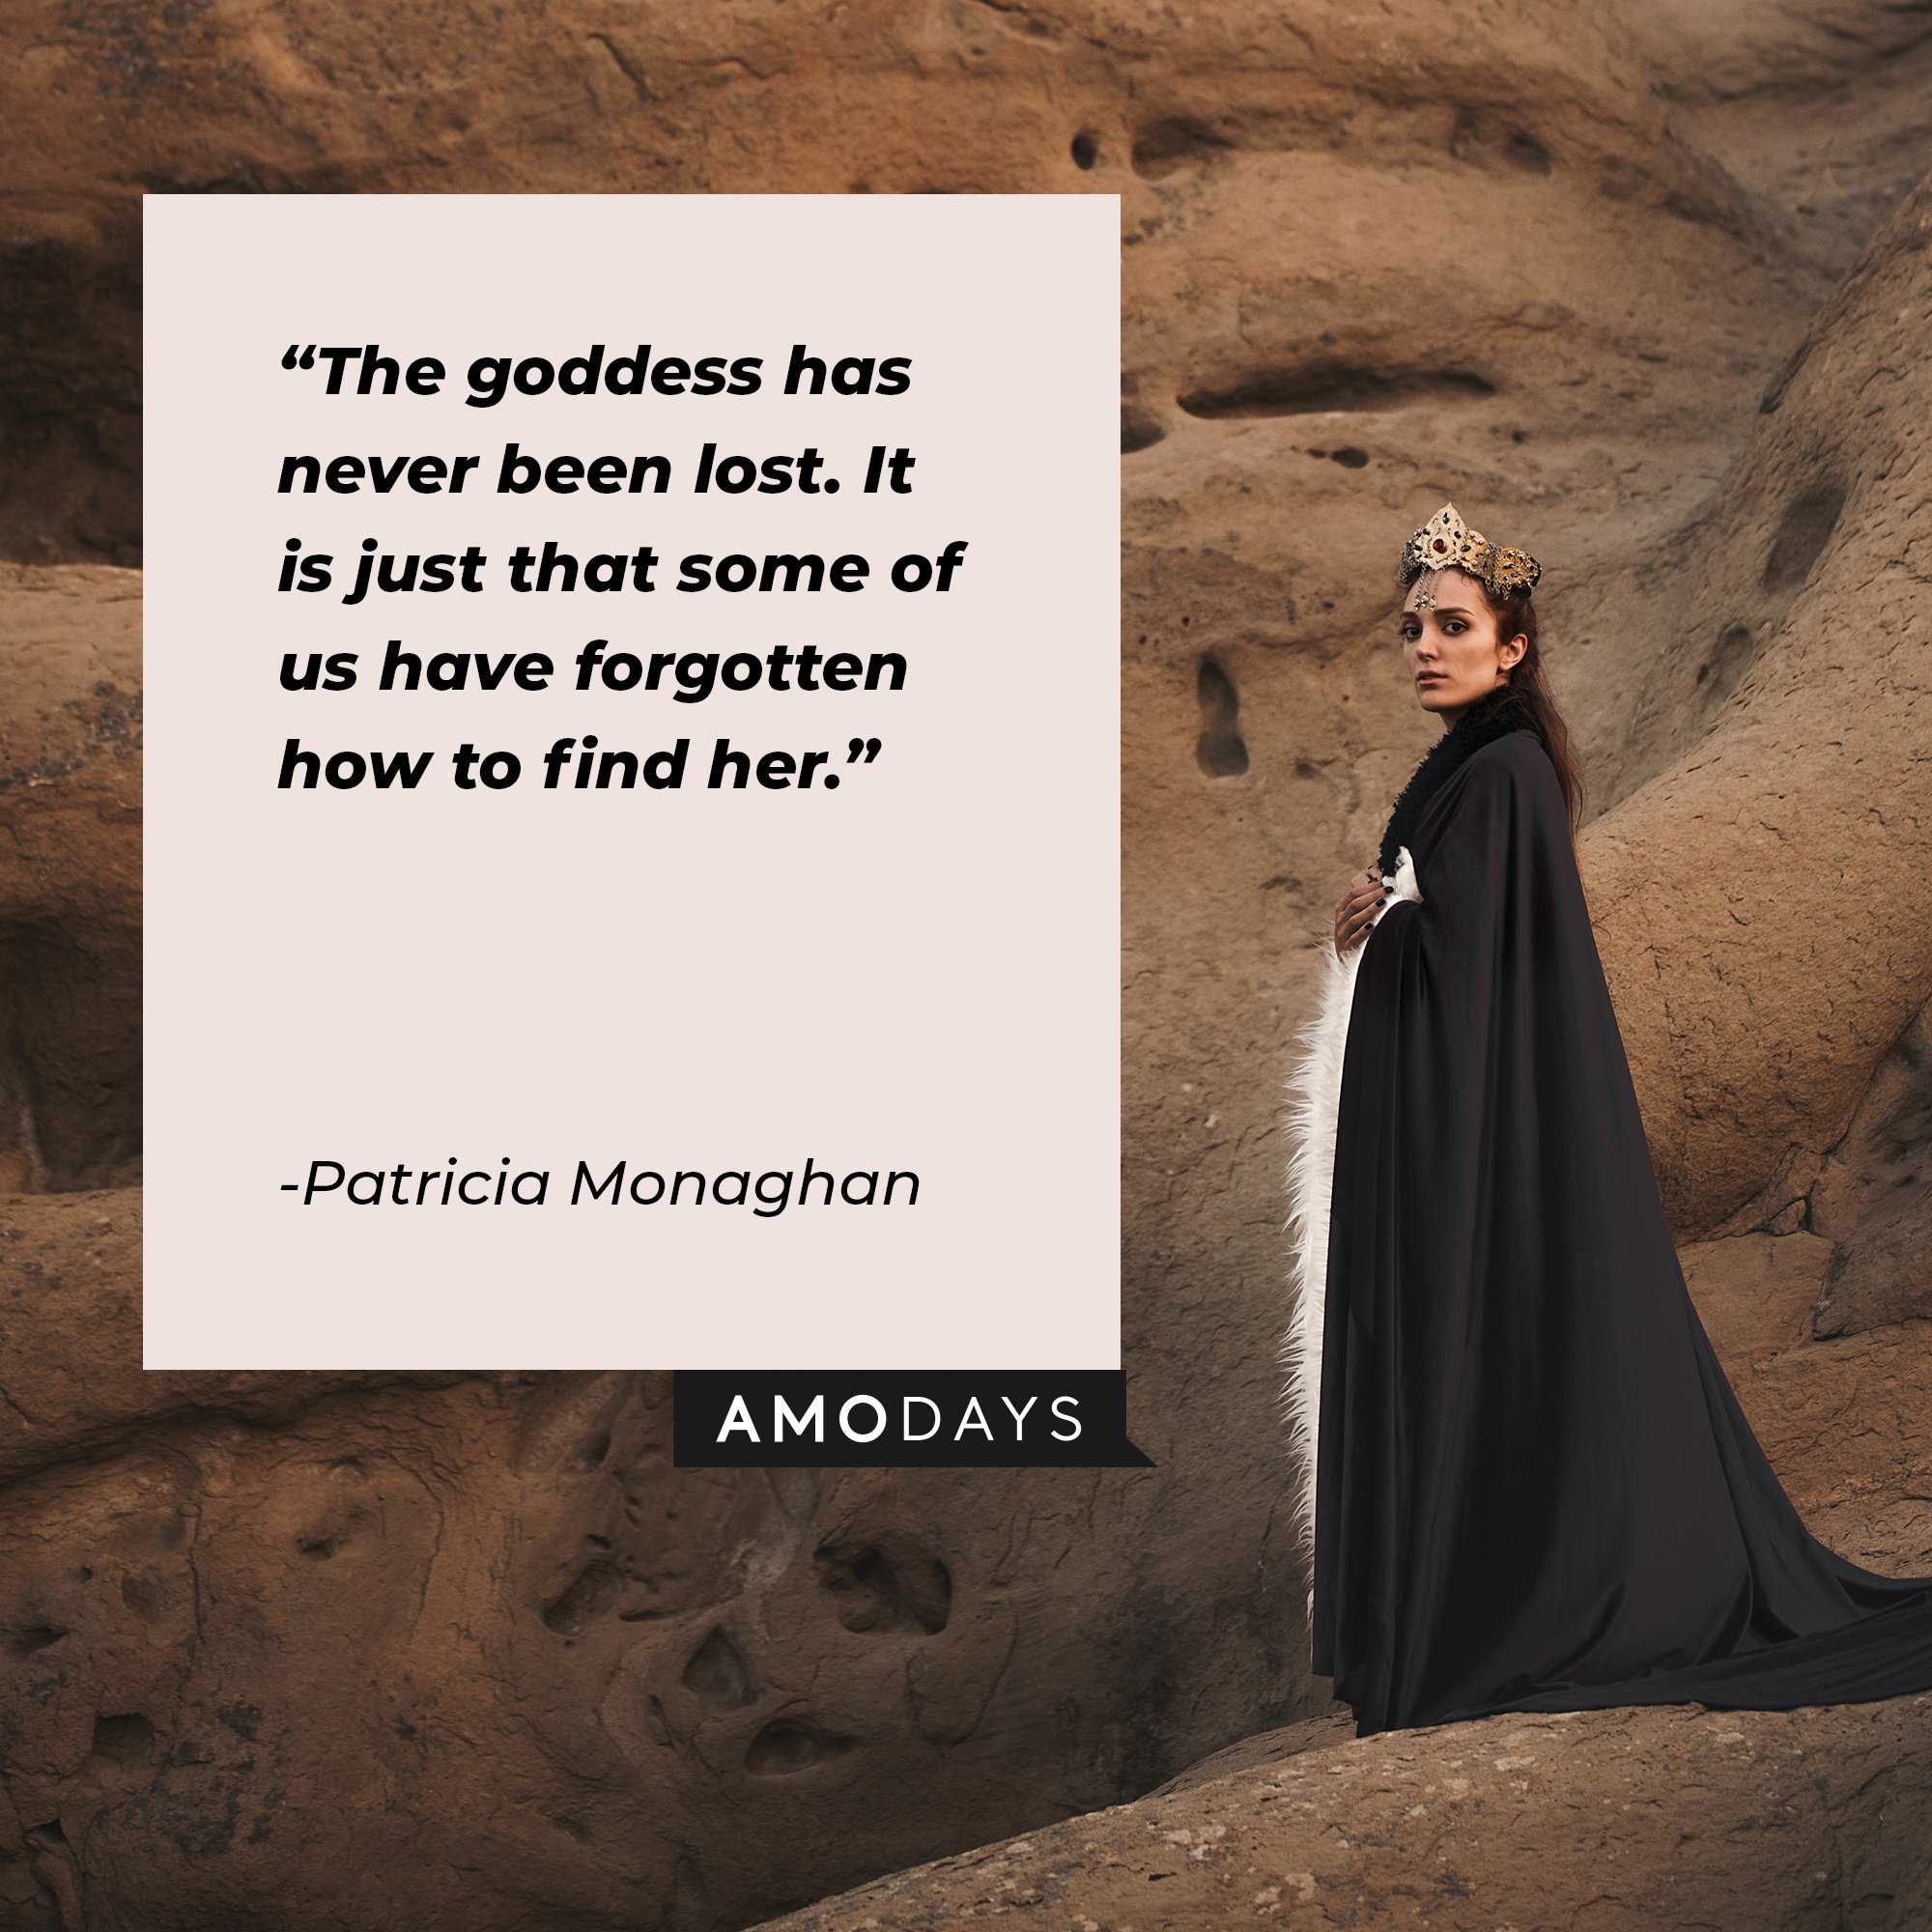  Patricia Monaghan’s quote: "The goddess has never been lost. It is just that some of us have forgotten how to find her." | Image: AmoDays  